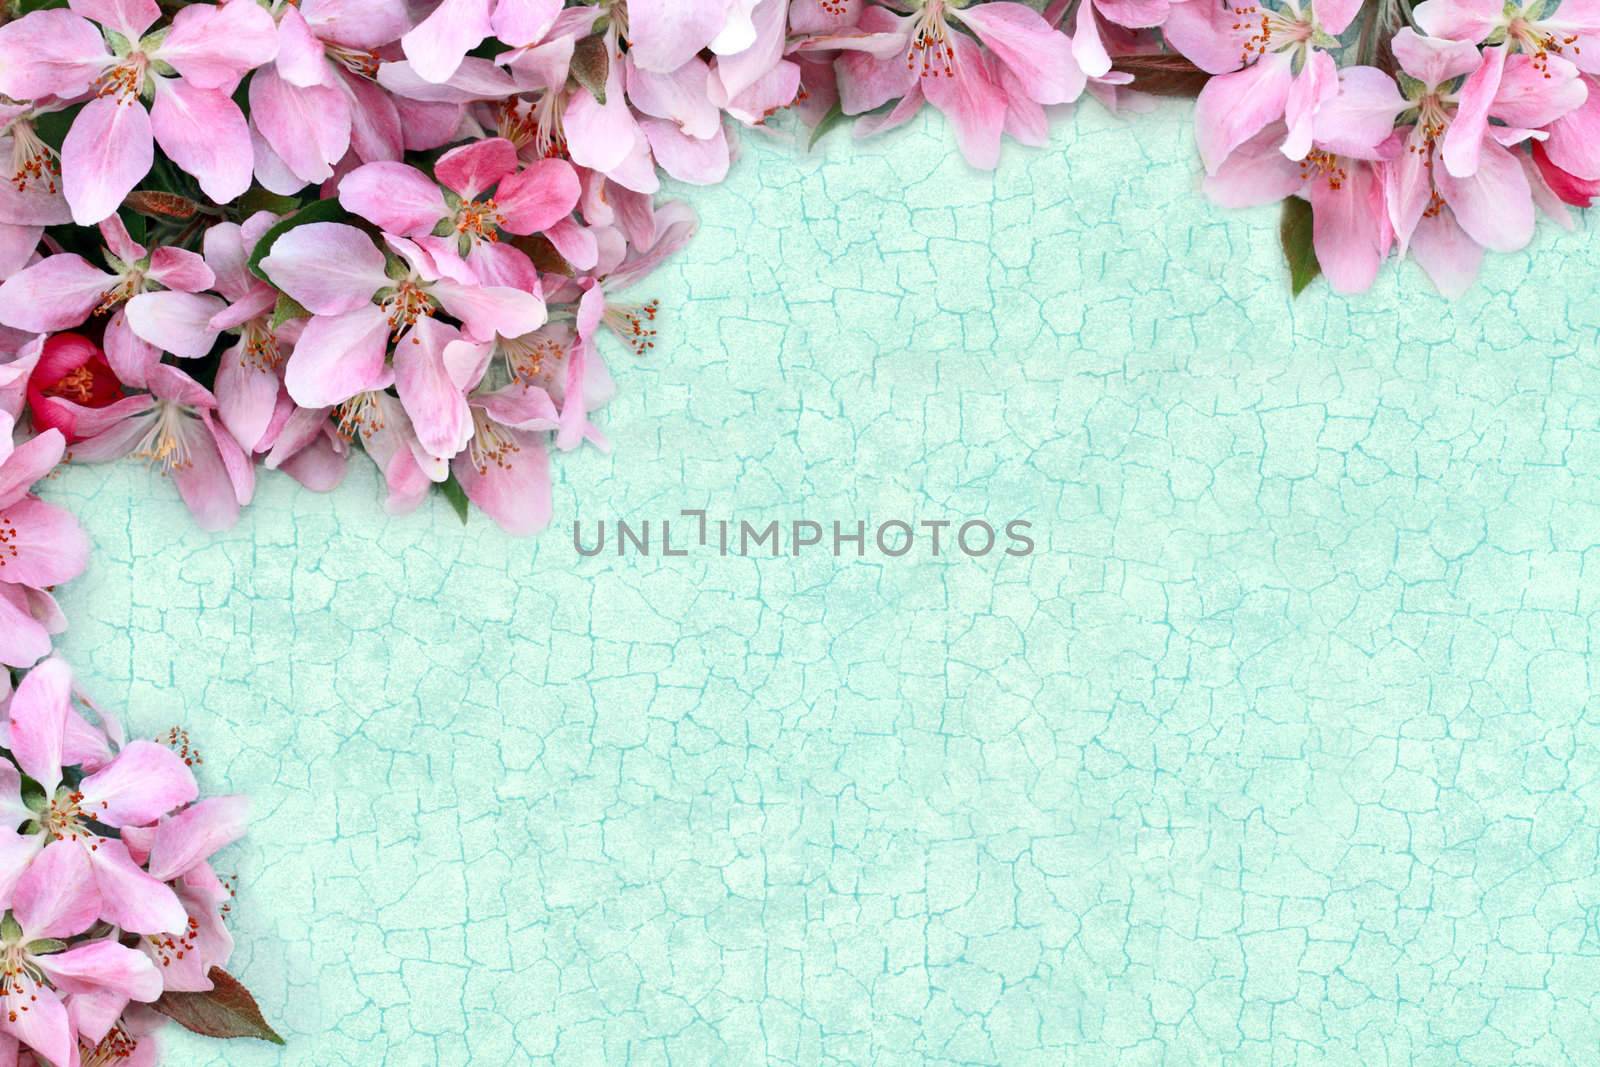 Floral craquelure background with room for your text.